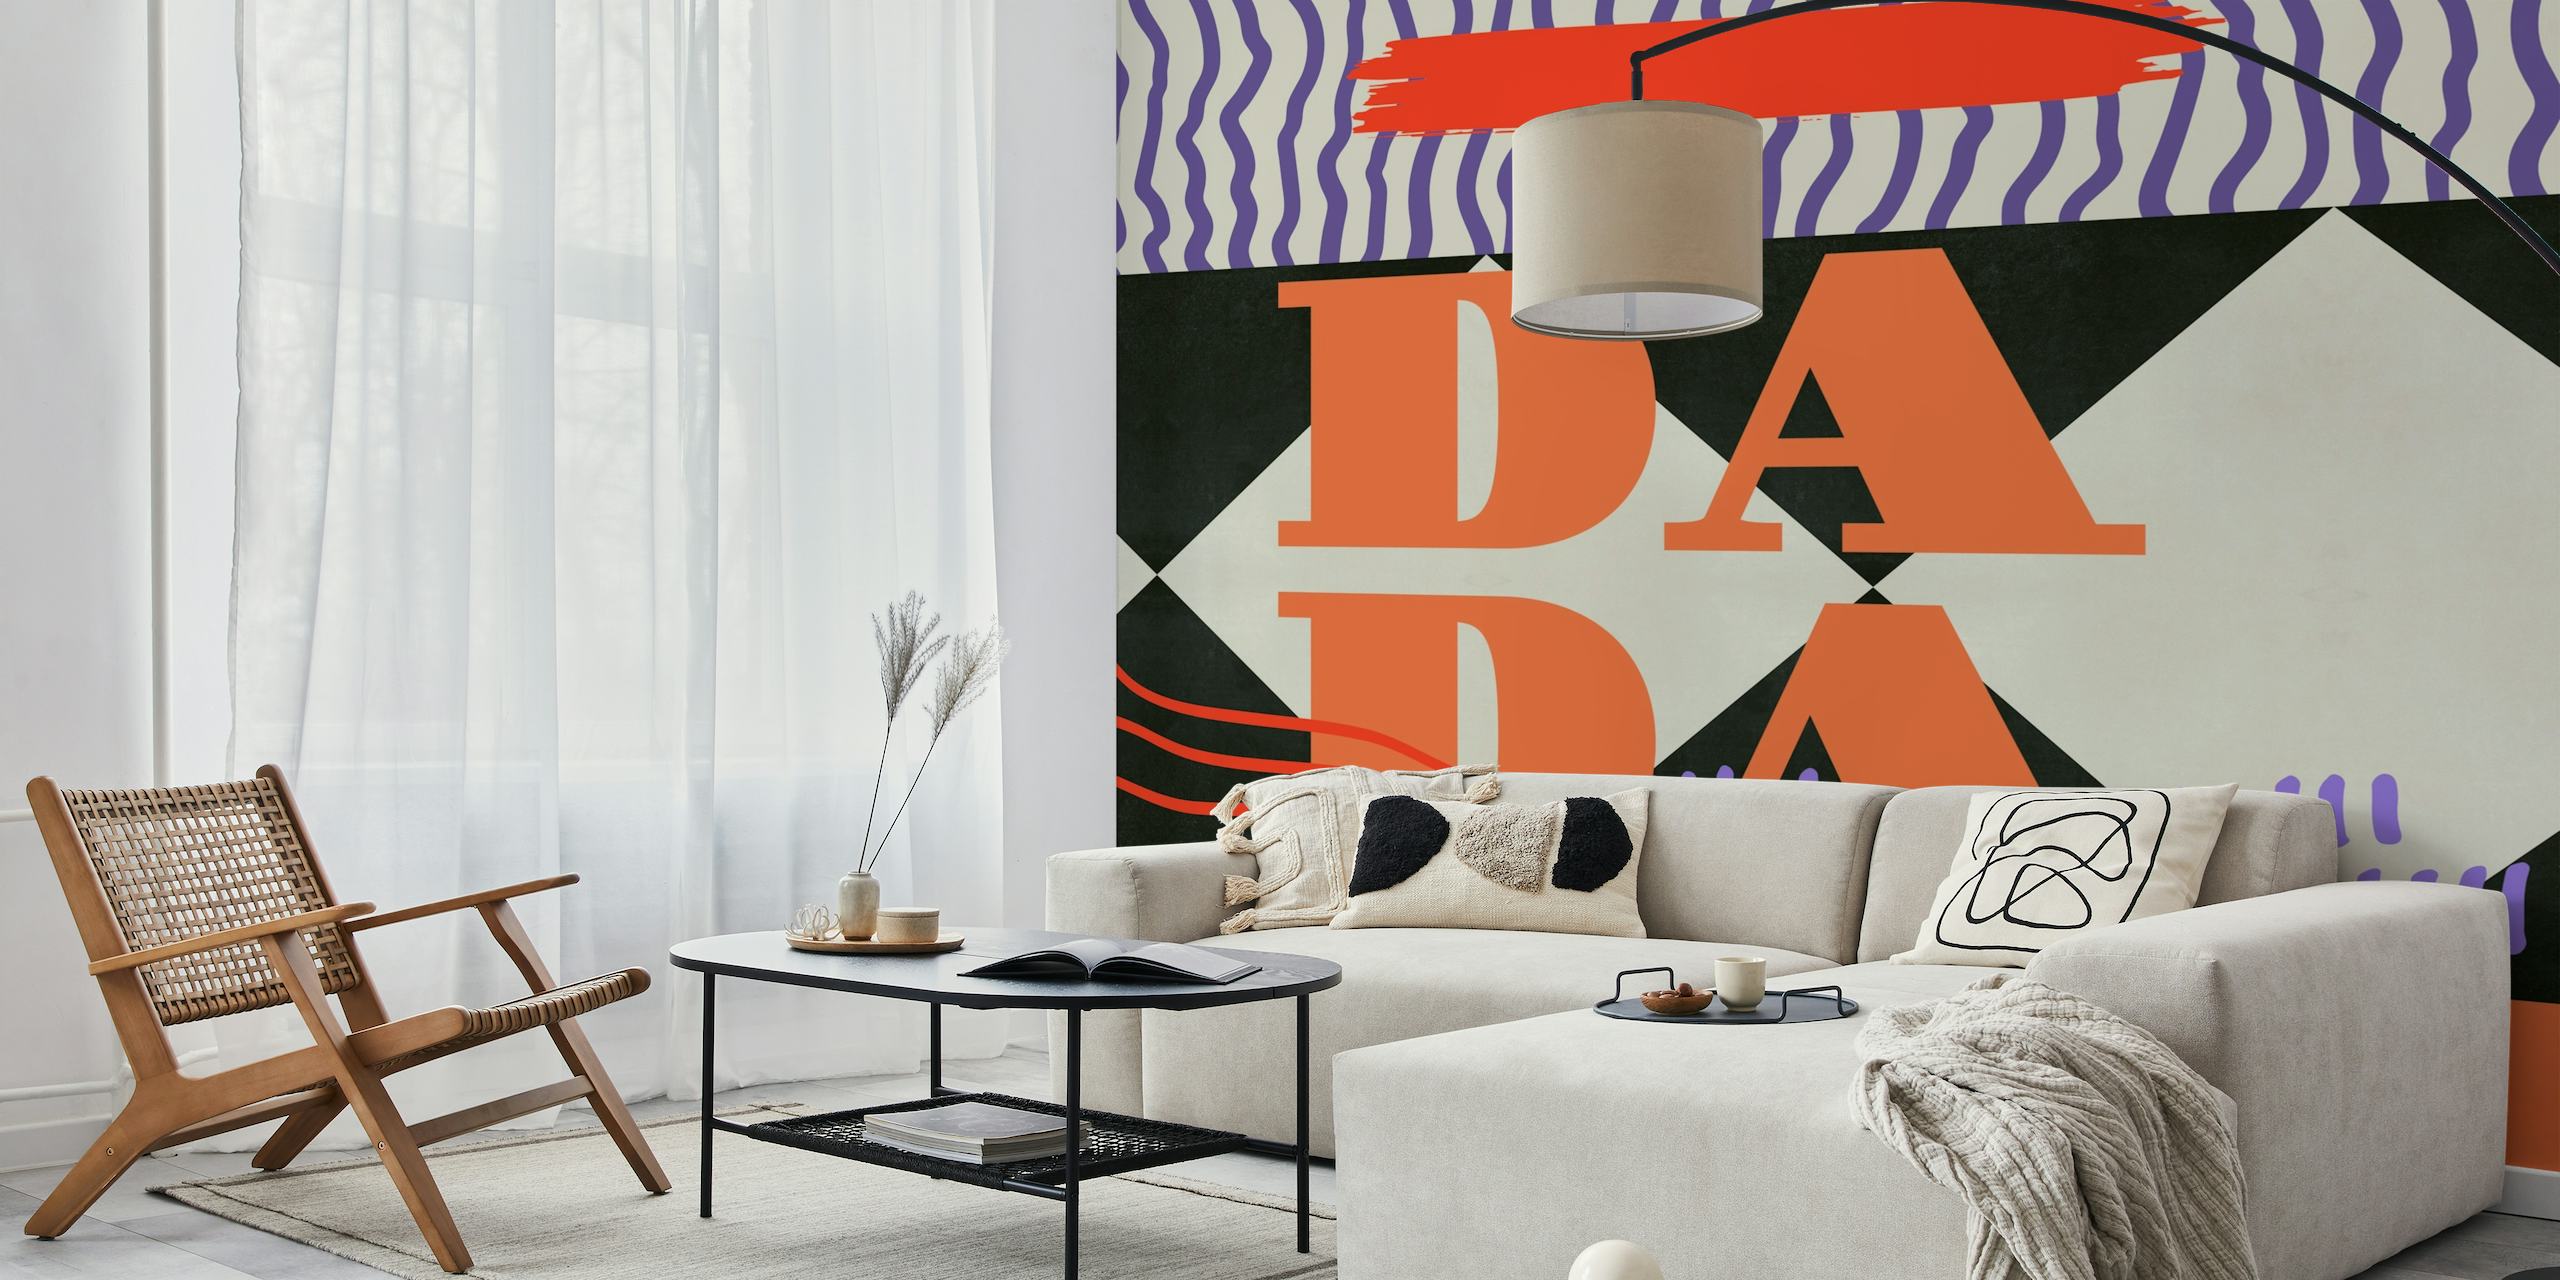 DADA Vintage wall mural with geometric patterns and vibrant colors